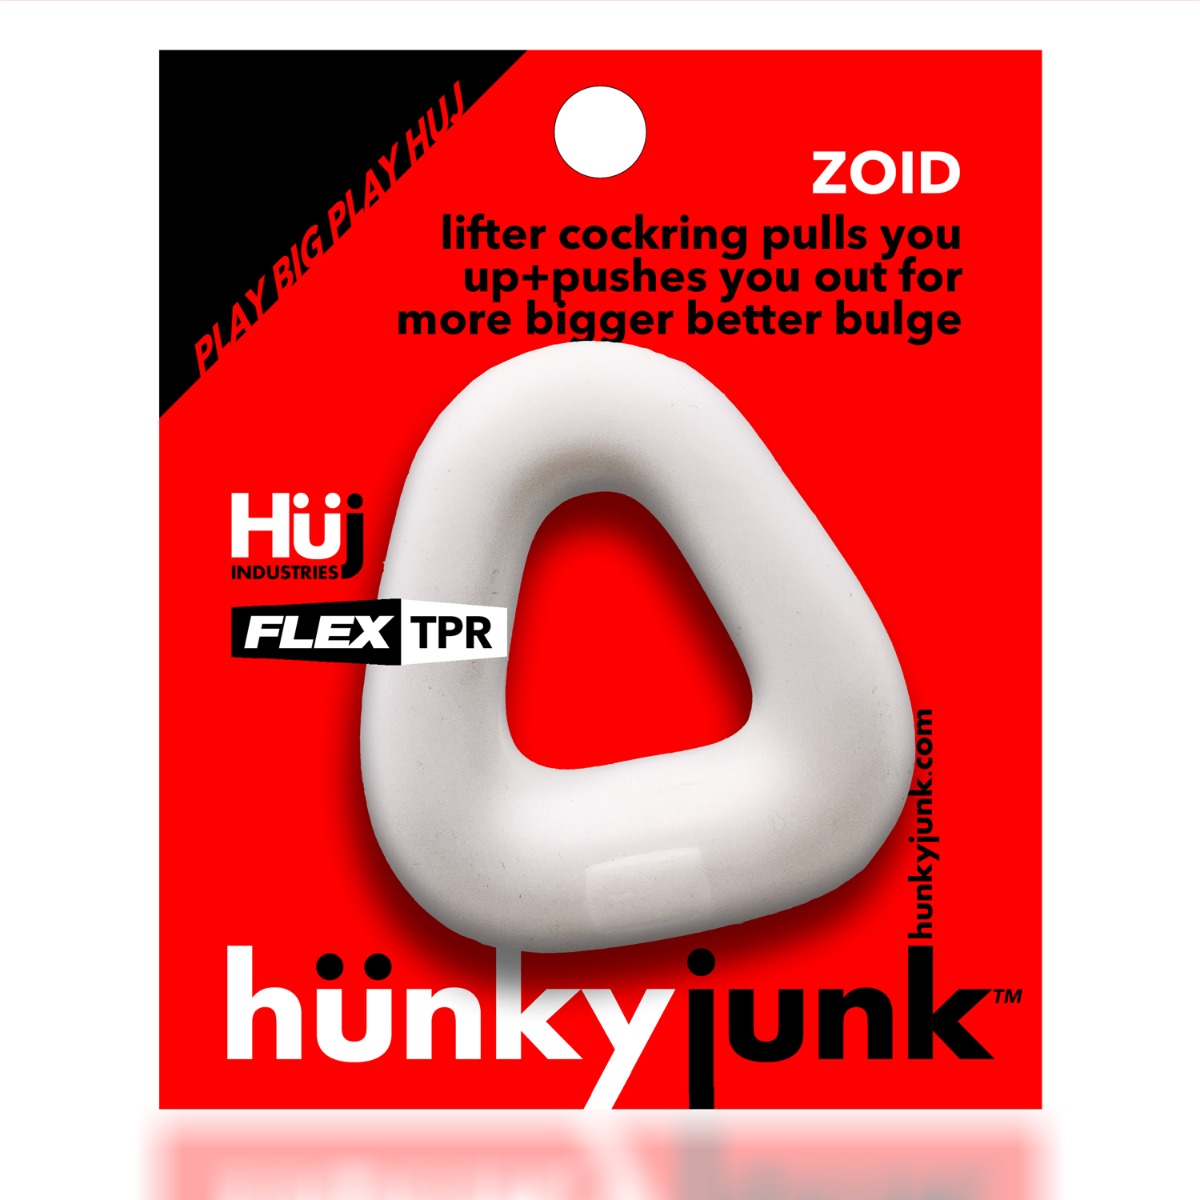 Hunkyjunk Zoid Trapaziod Lifter Cockring White Ice